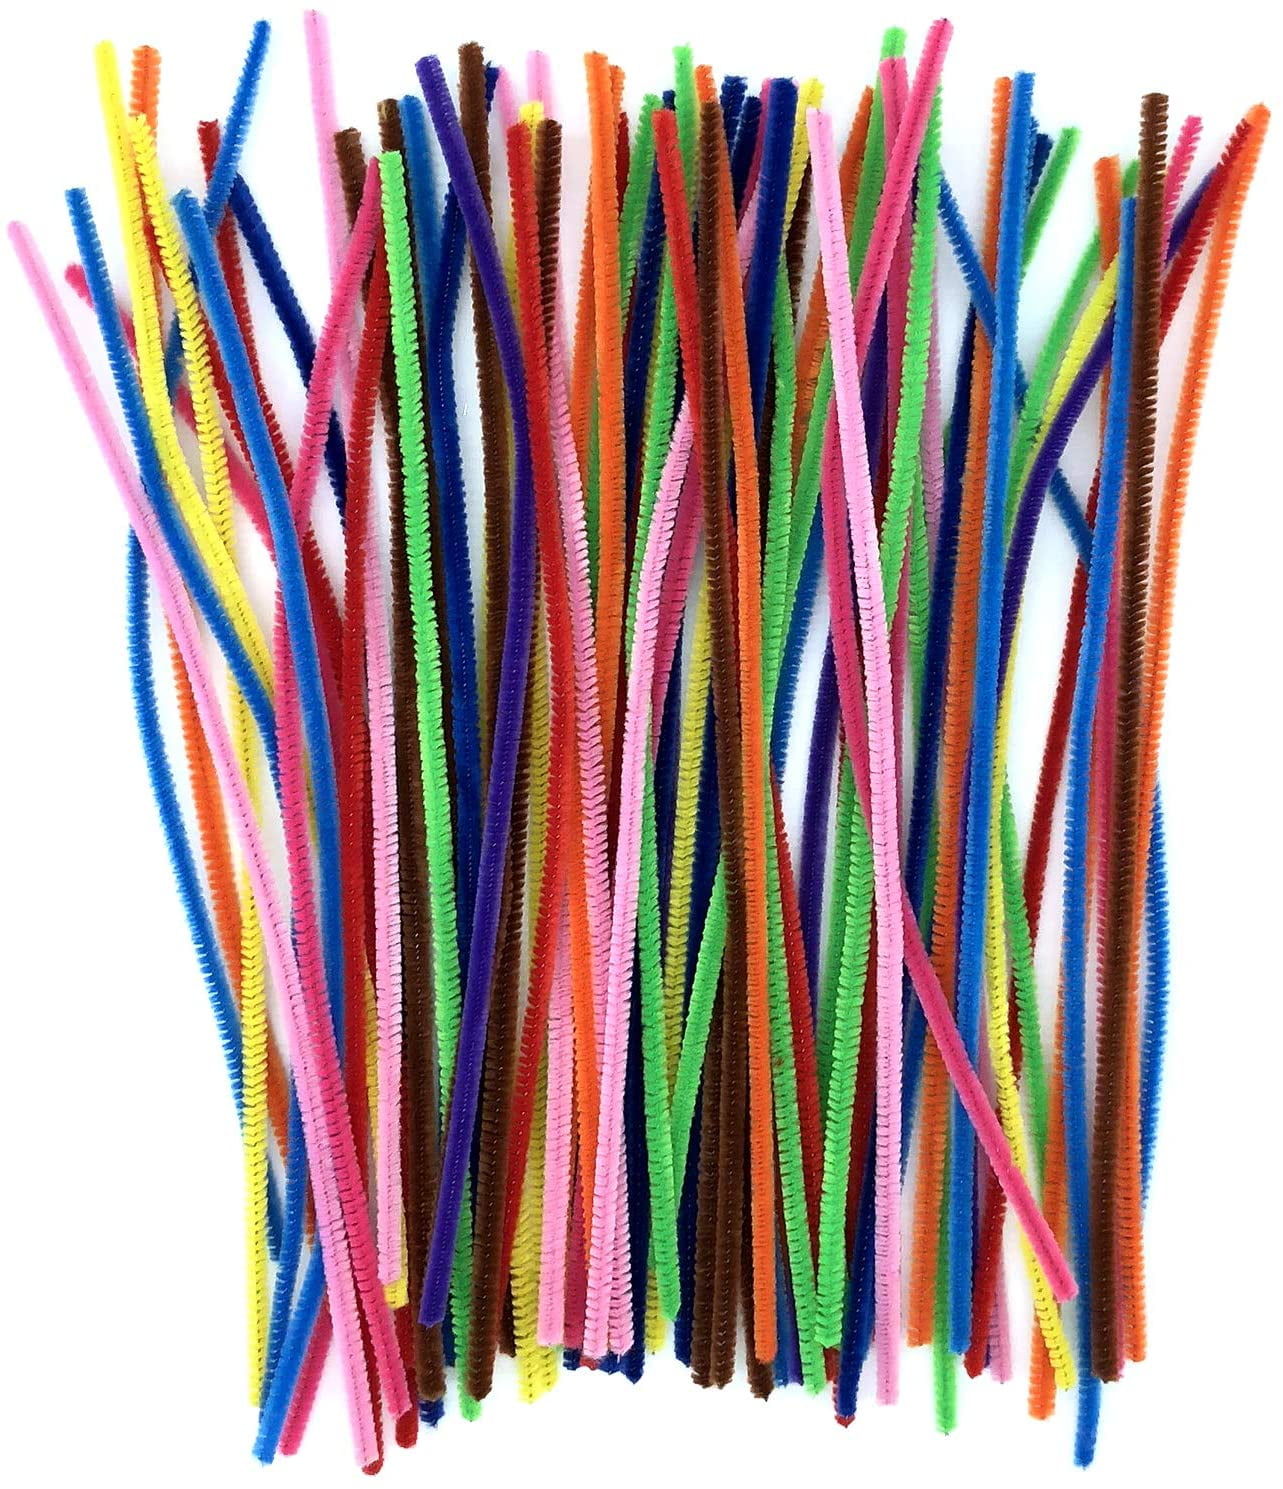 long,6mm wide 10-1,000 x PINK chenille craft stems pipe cleaners 30cm 12" 